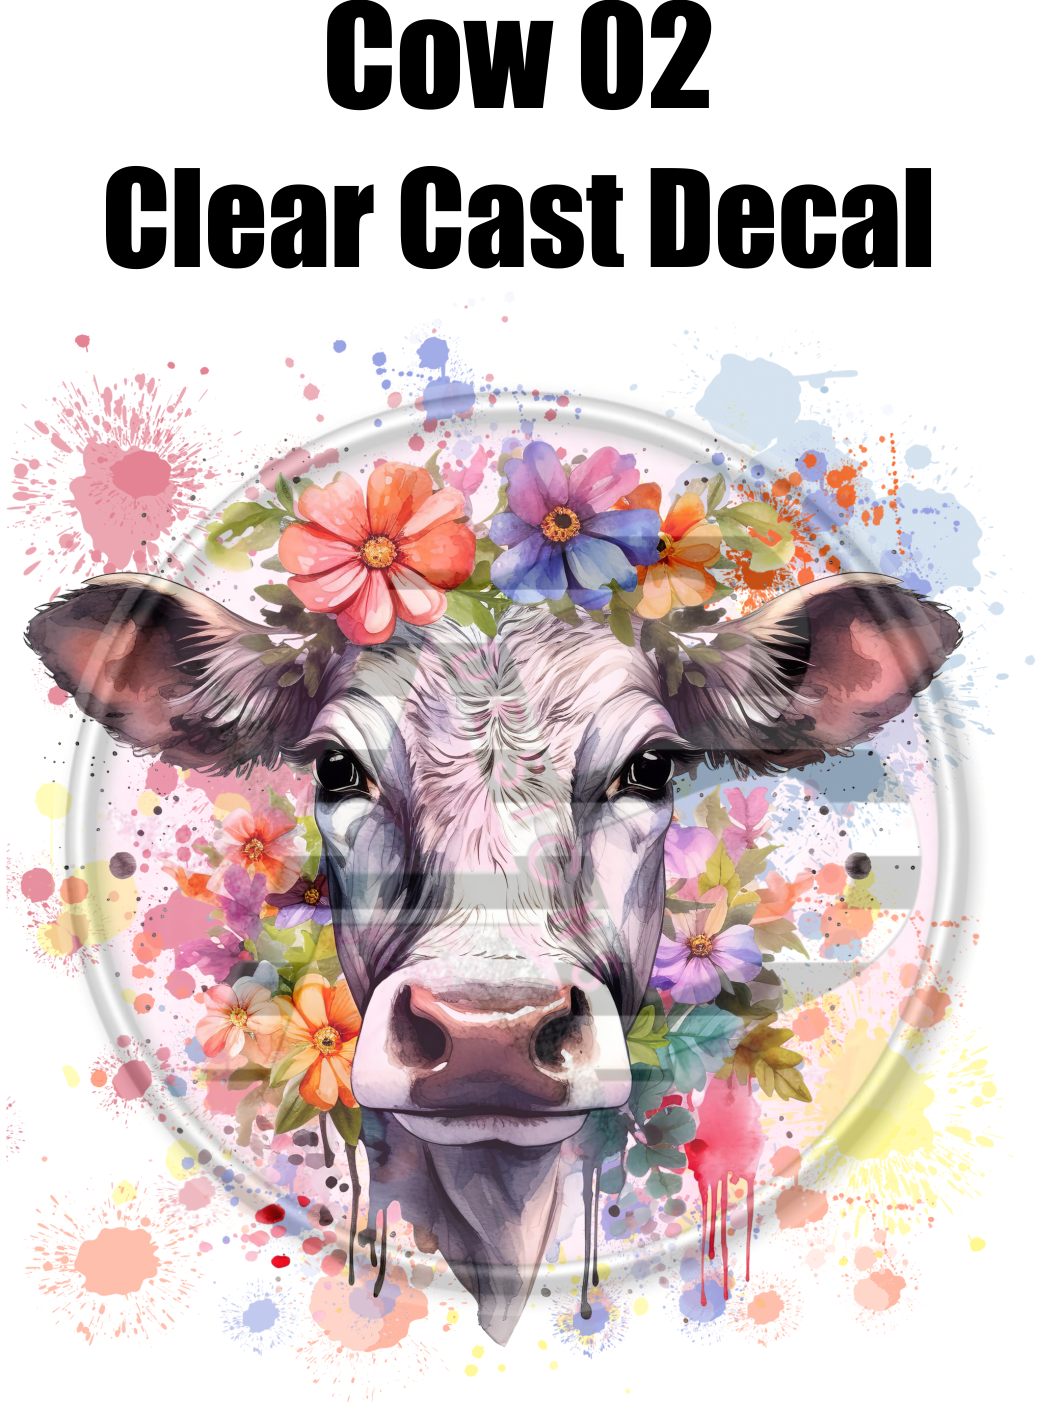 Cow 02 - Clear Cast Decal -145